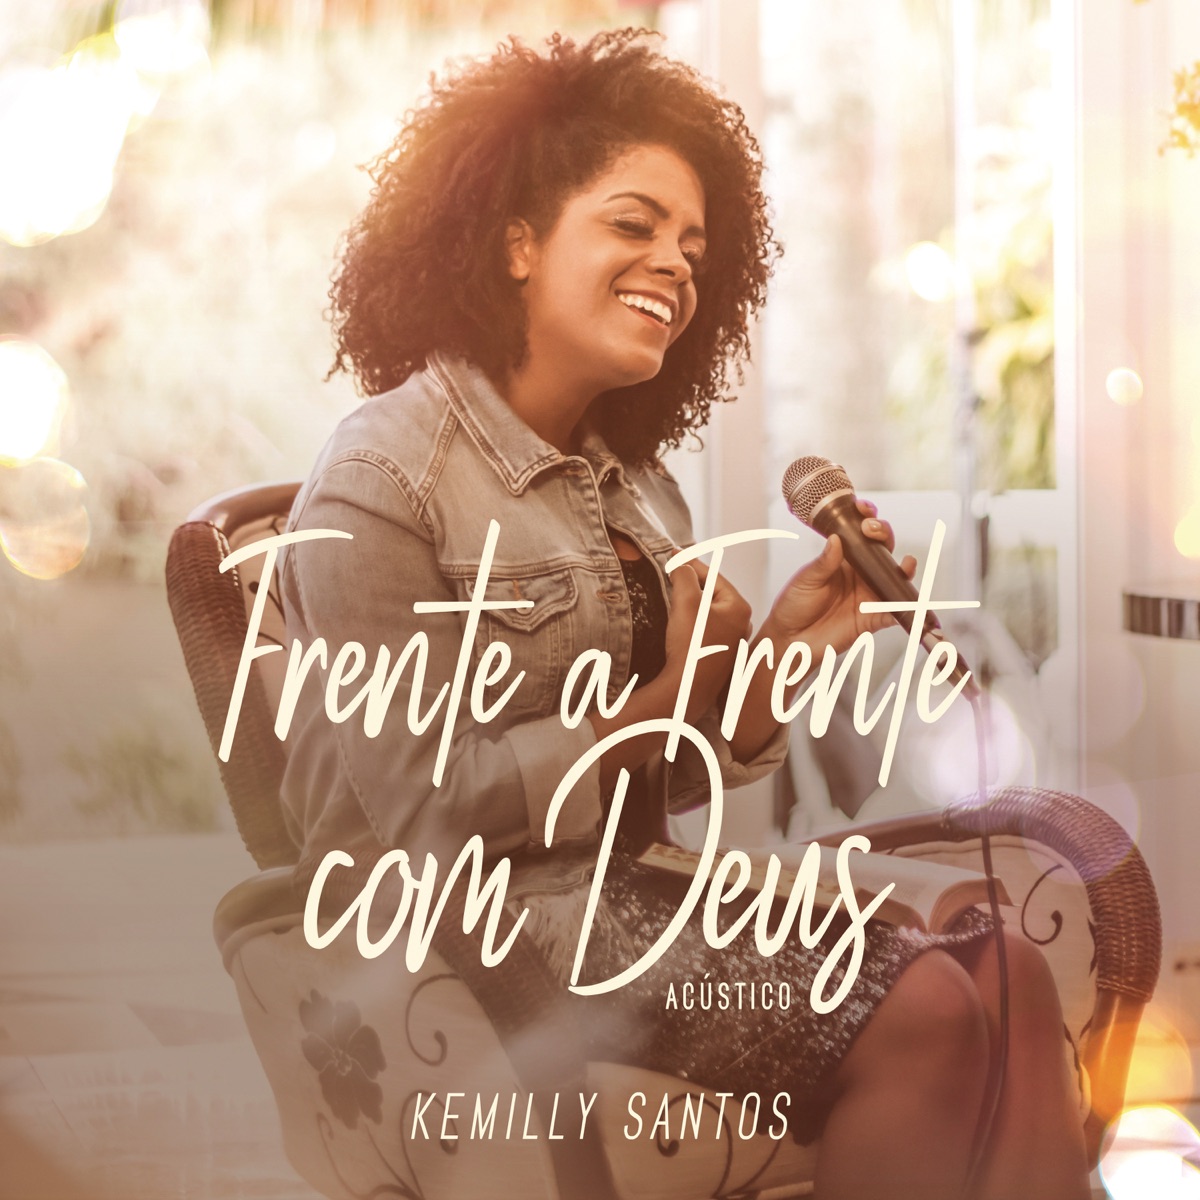 Play Fica Tranquilo Playback by Kemilly Santos on  Music